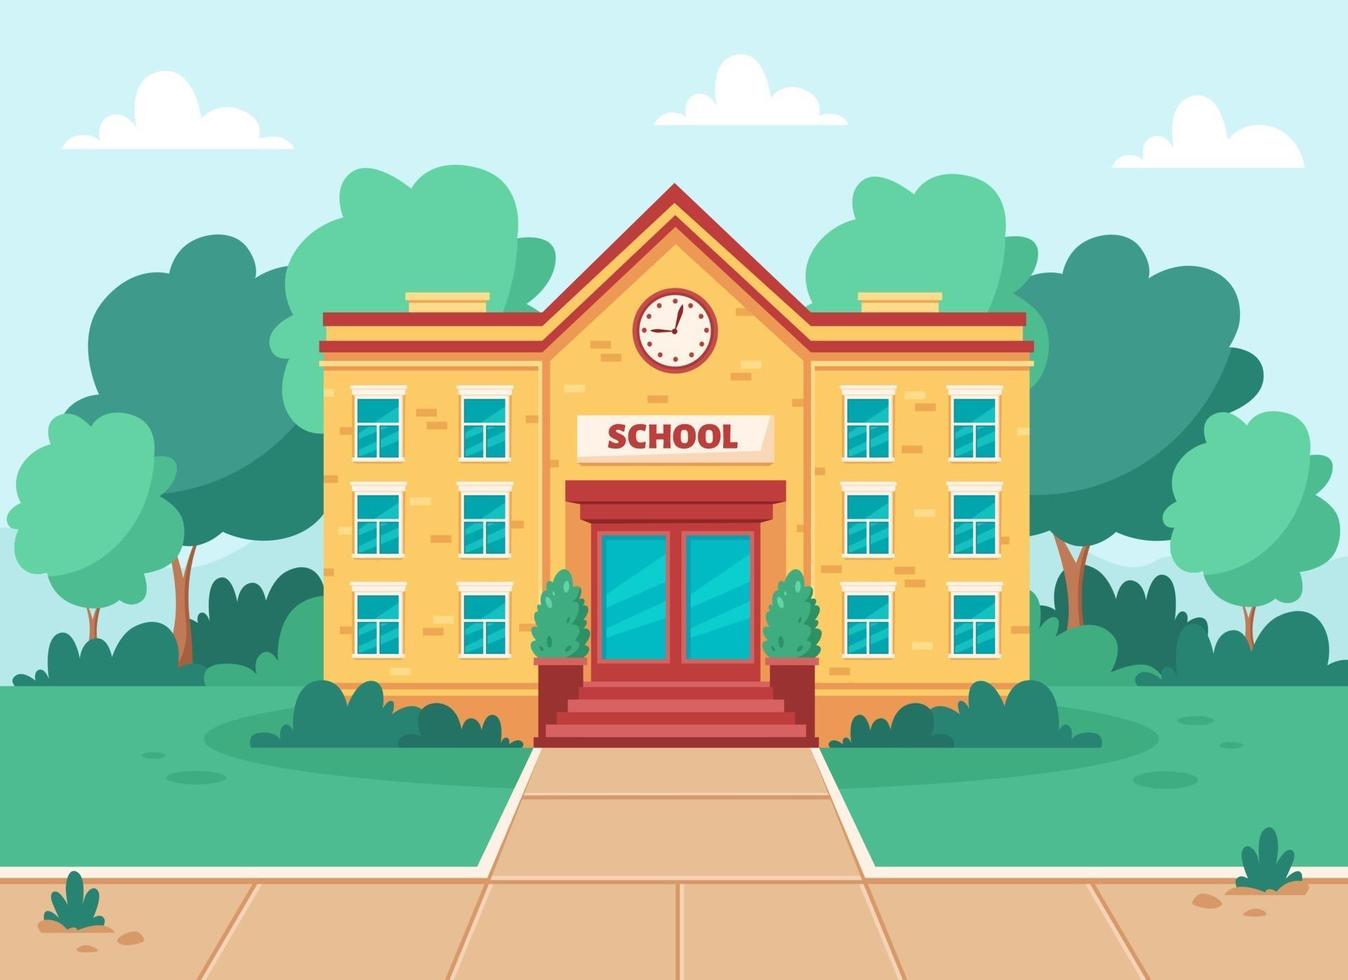 School building, educational institution with front  yard, trees and grass lawn. vector